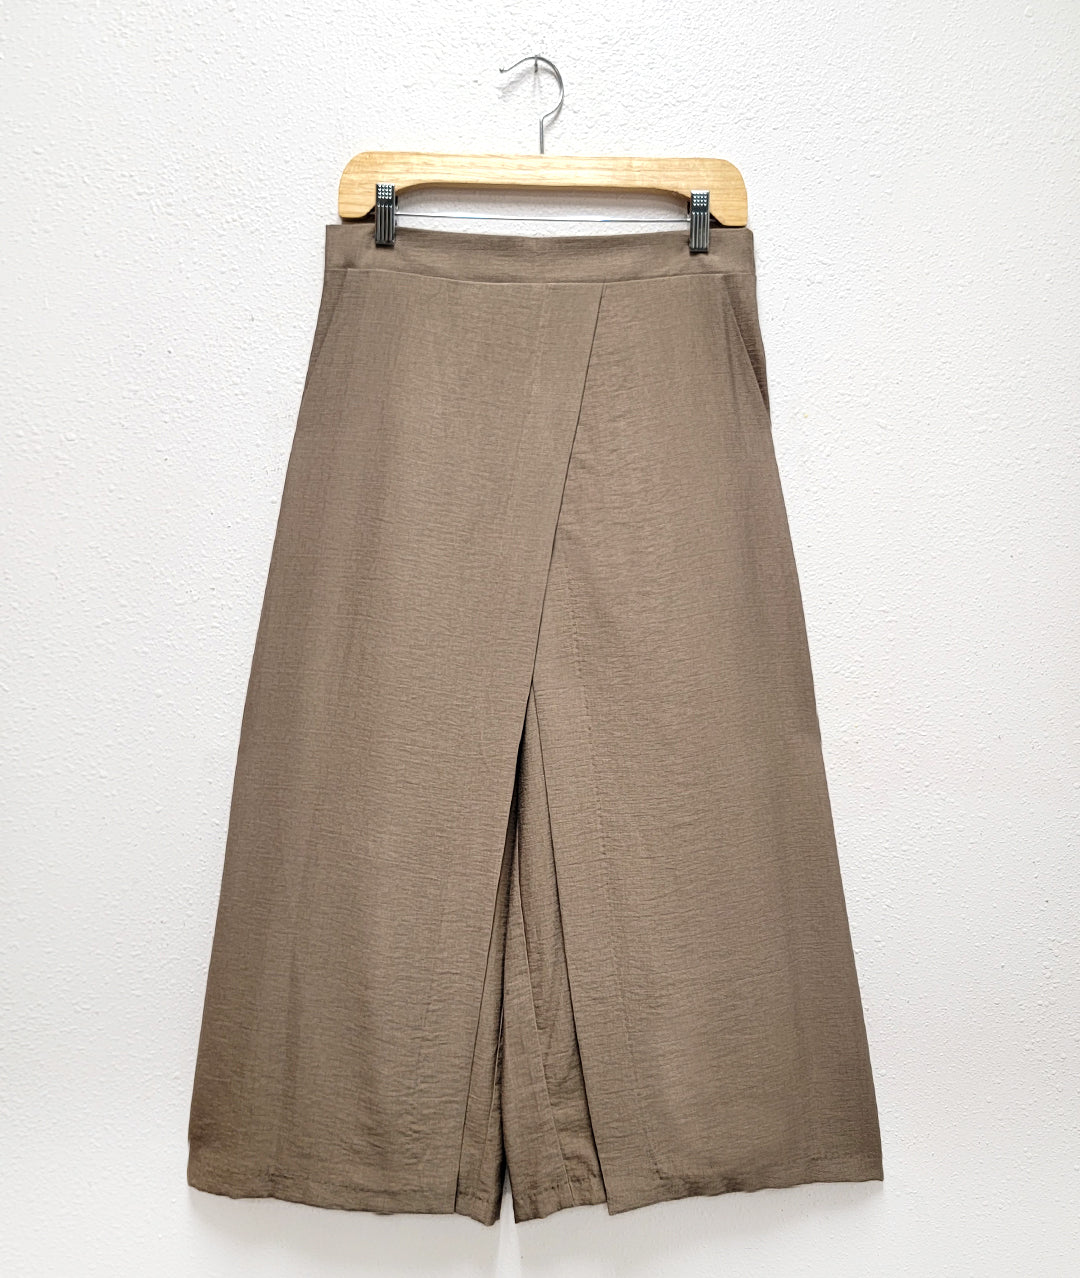 wide leg khaki color pant with an overlap panel in the front